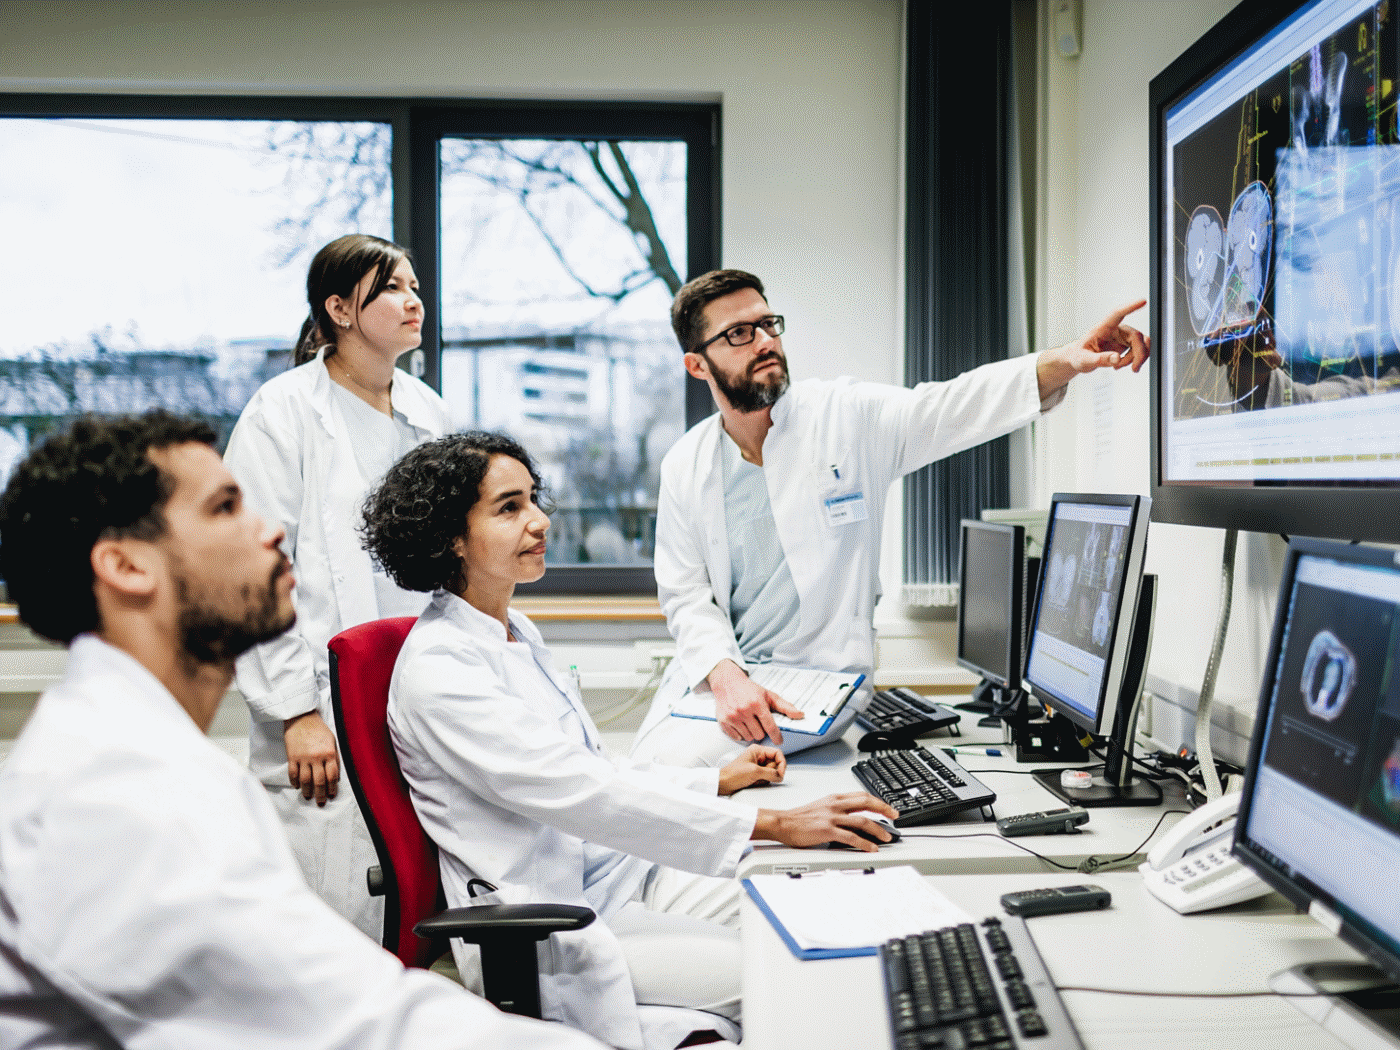 A team of doctors looking at some lab results together on monitors, in an office at the hospital.